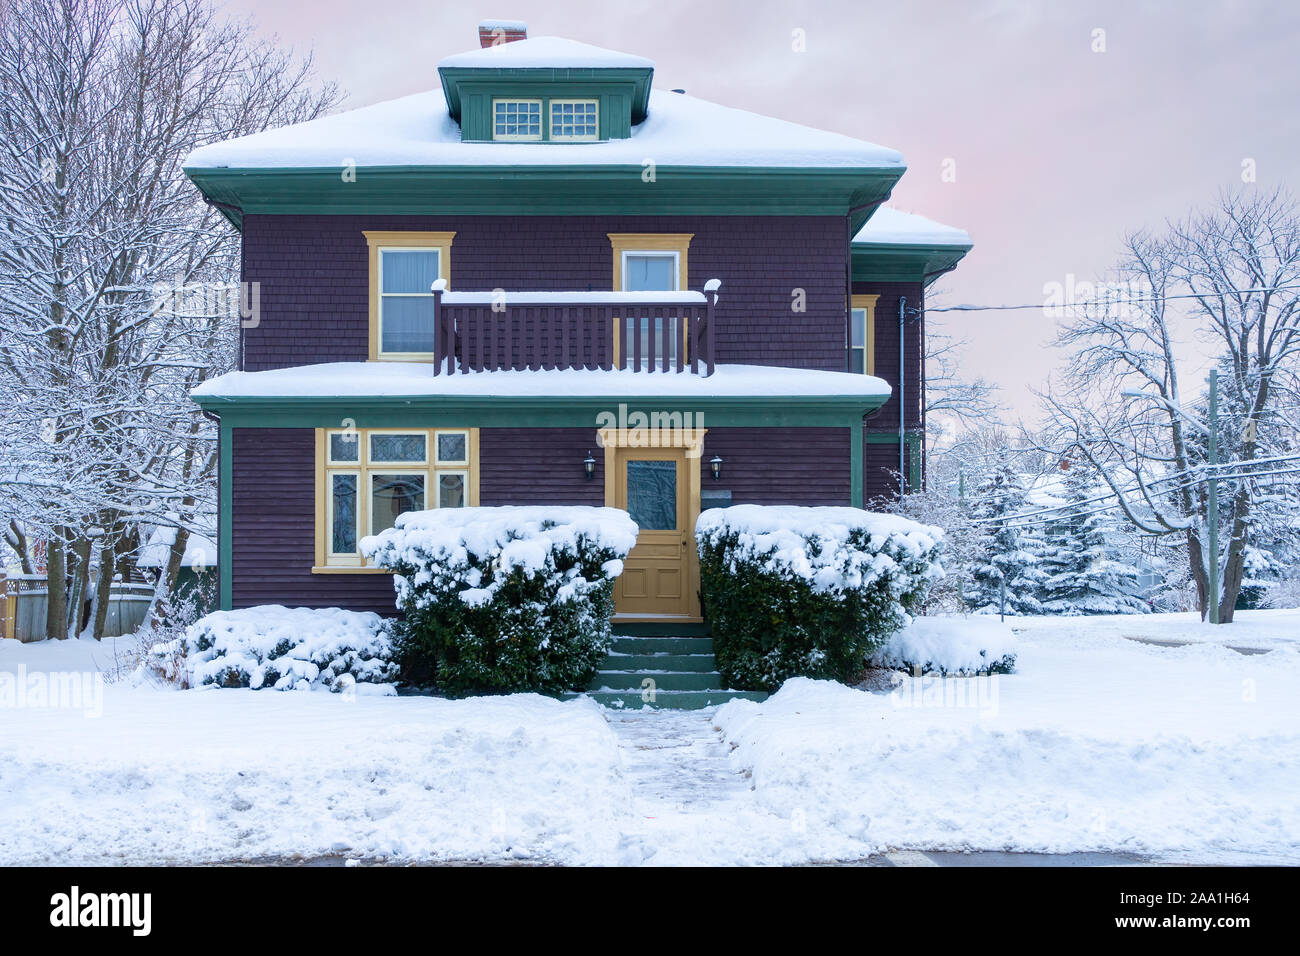 Older traditional style home after a snowfall. Stock Photo